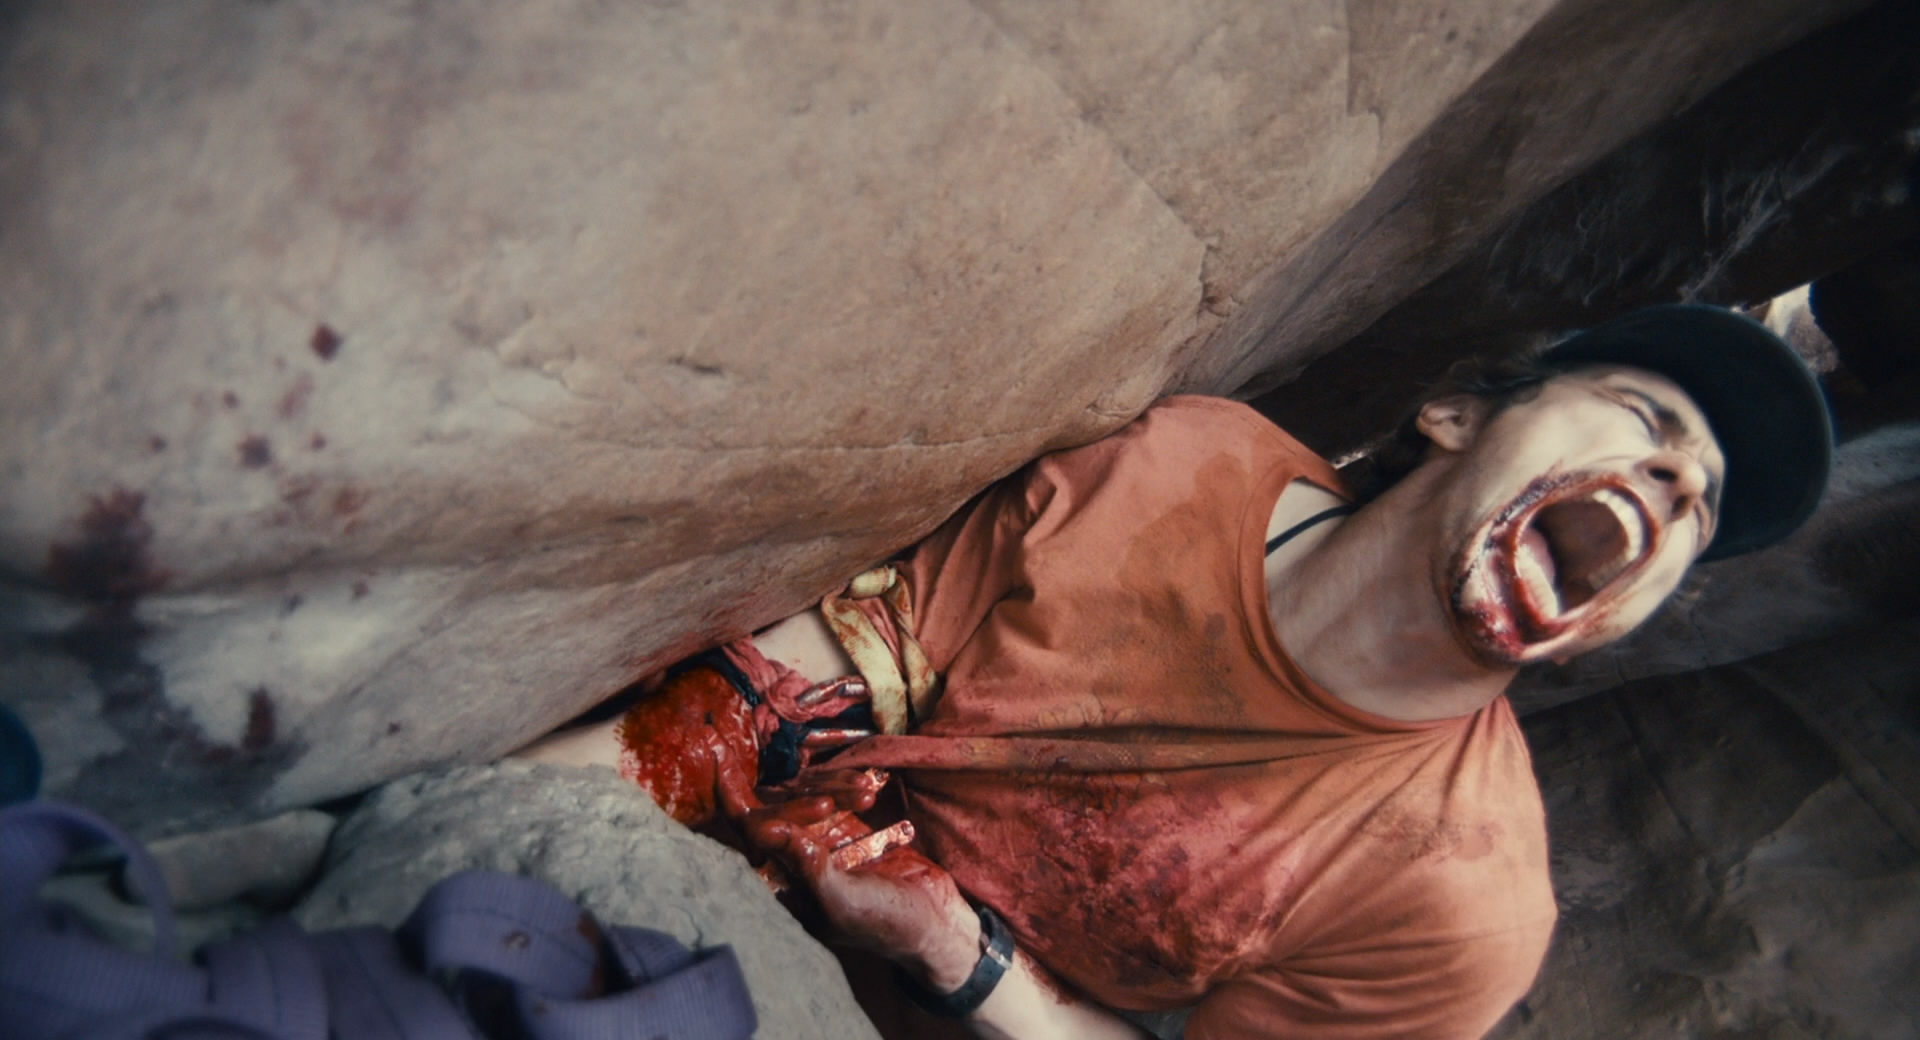 Movie 127 Hours HD Wallpaper | Background Image